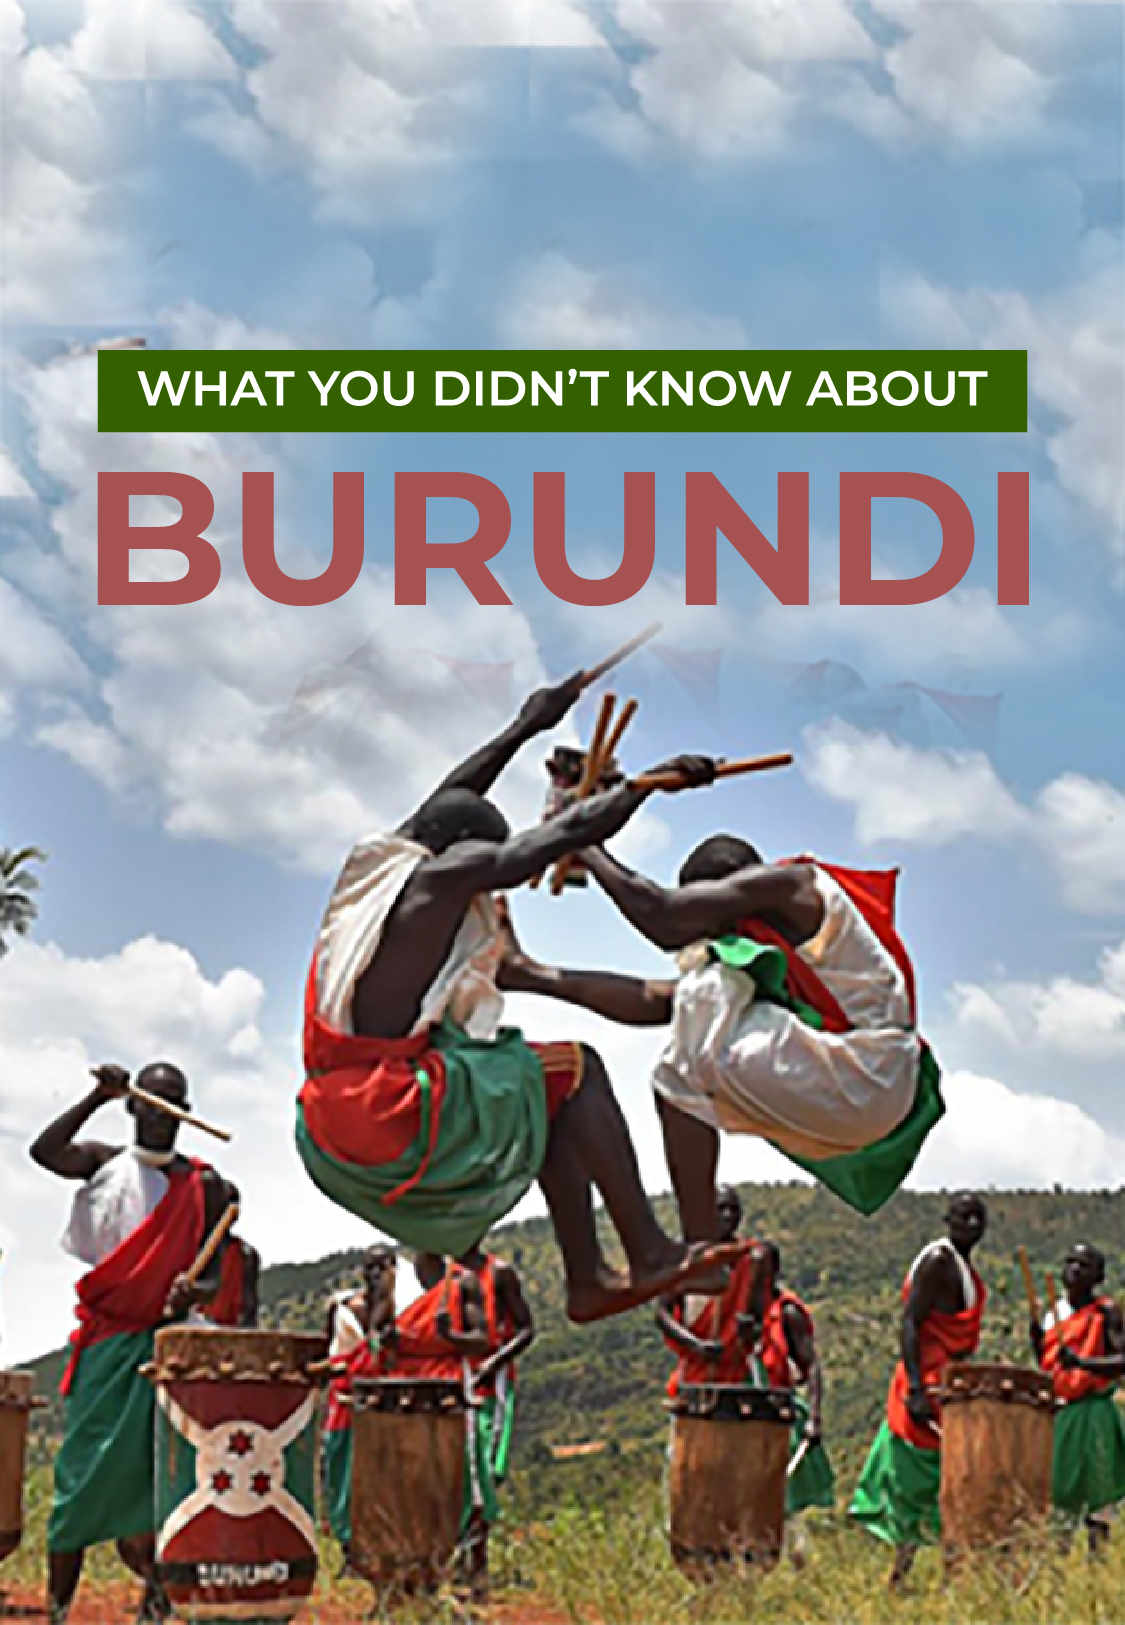 What you didn't know about Burundi